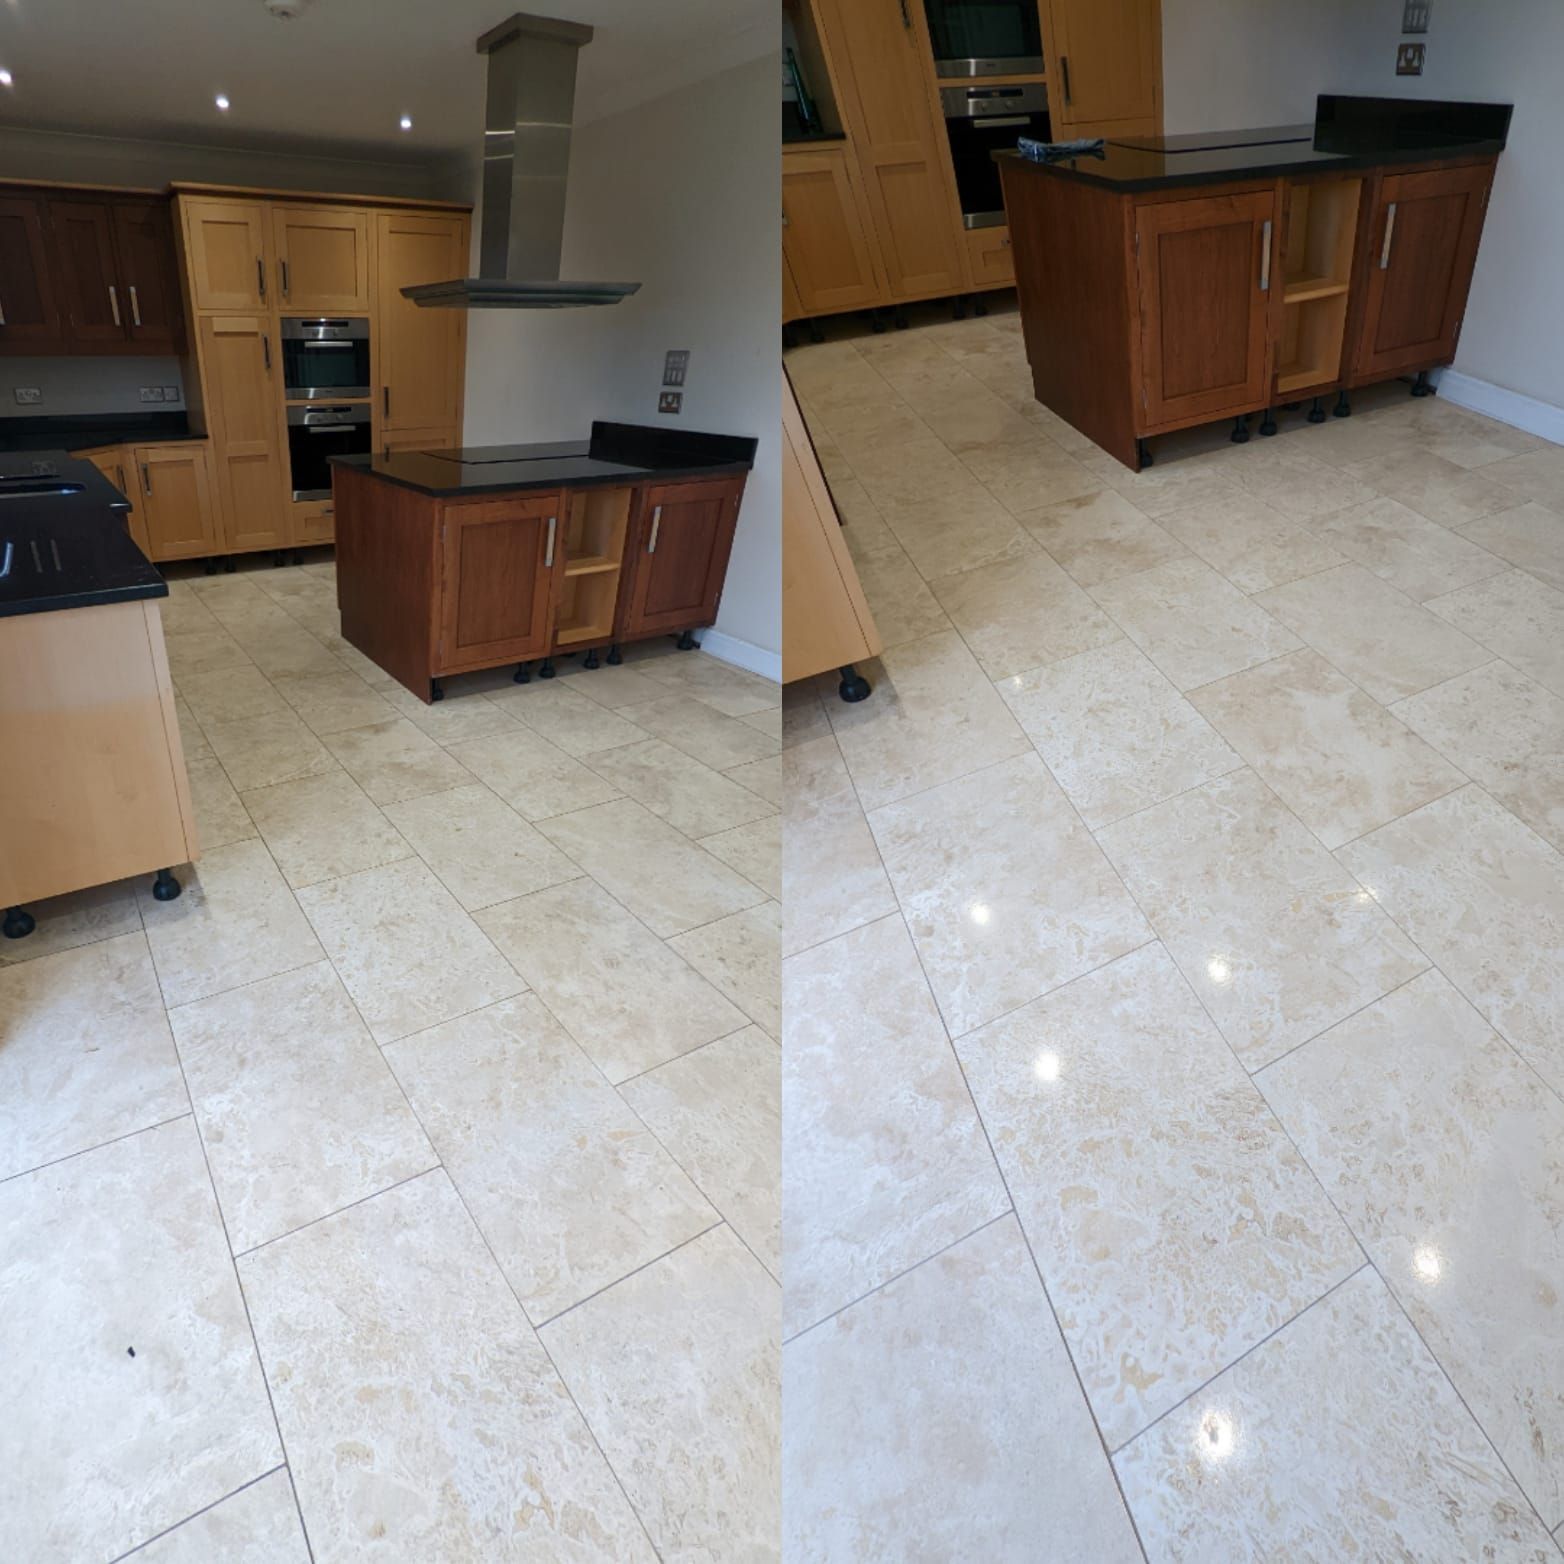 Limestone travertine deep cleaning, polishing, sealing and grout cleaning in Greater Manchester. Filling in holes with a resin filler.